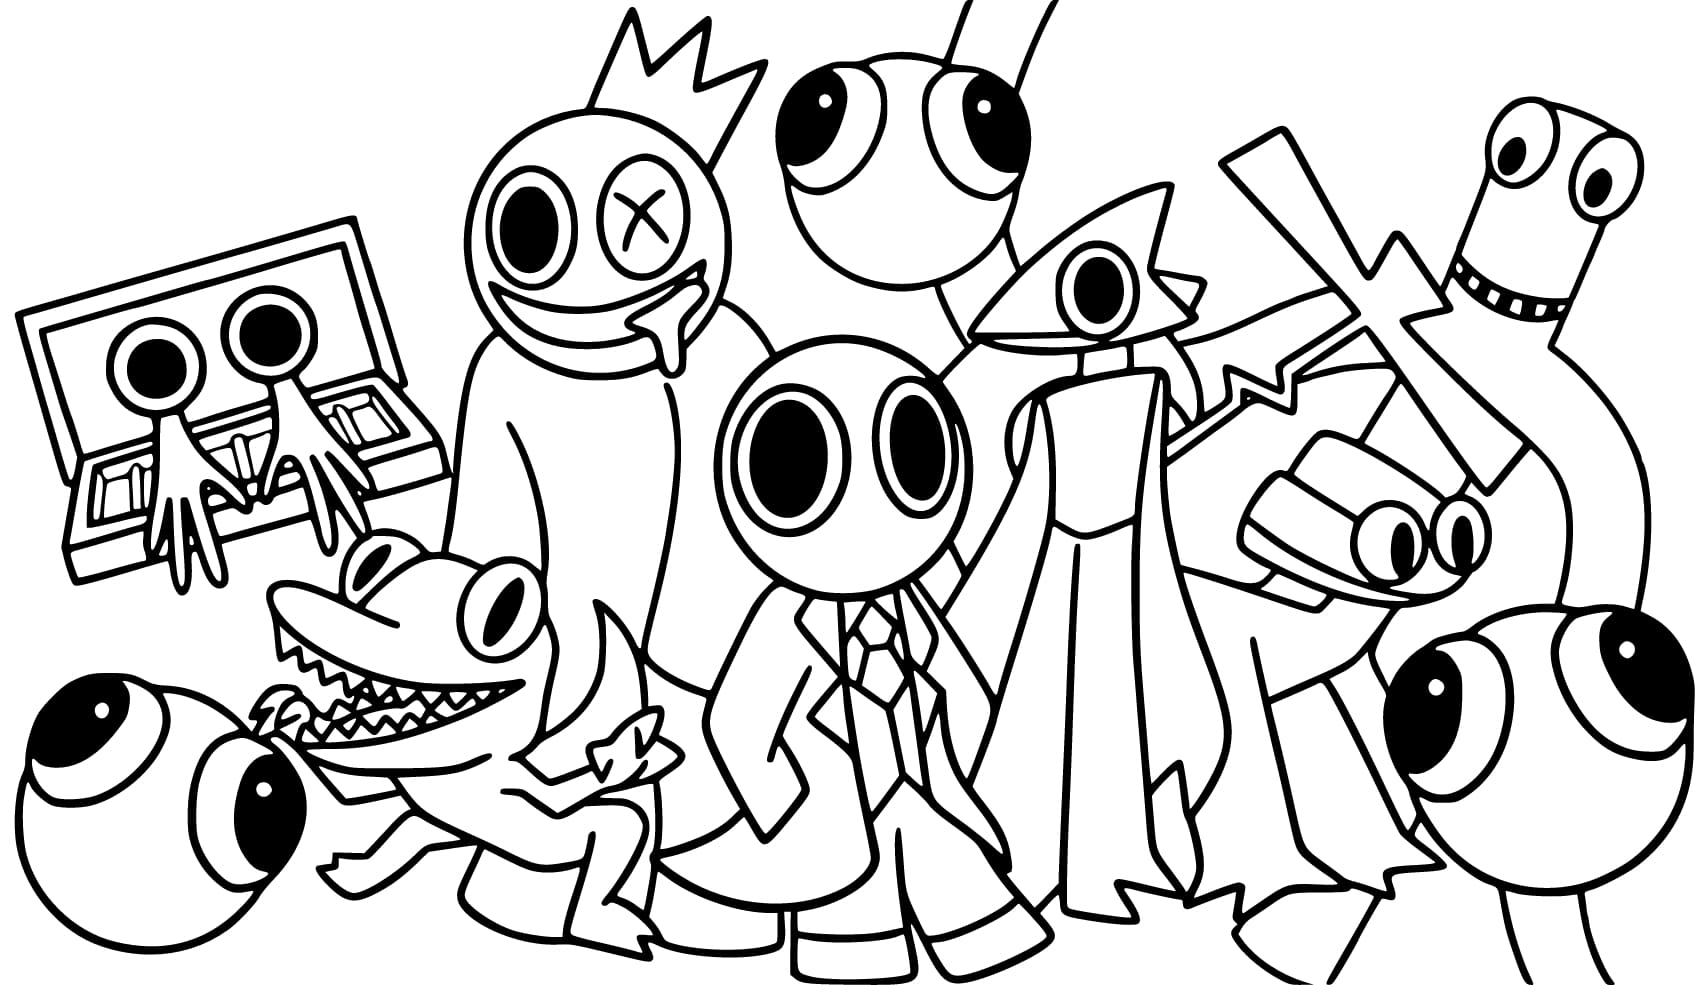 Green Rainbow Friends Coloring Pages